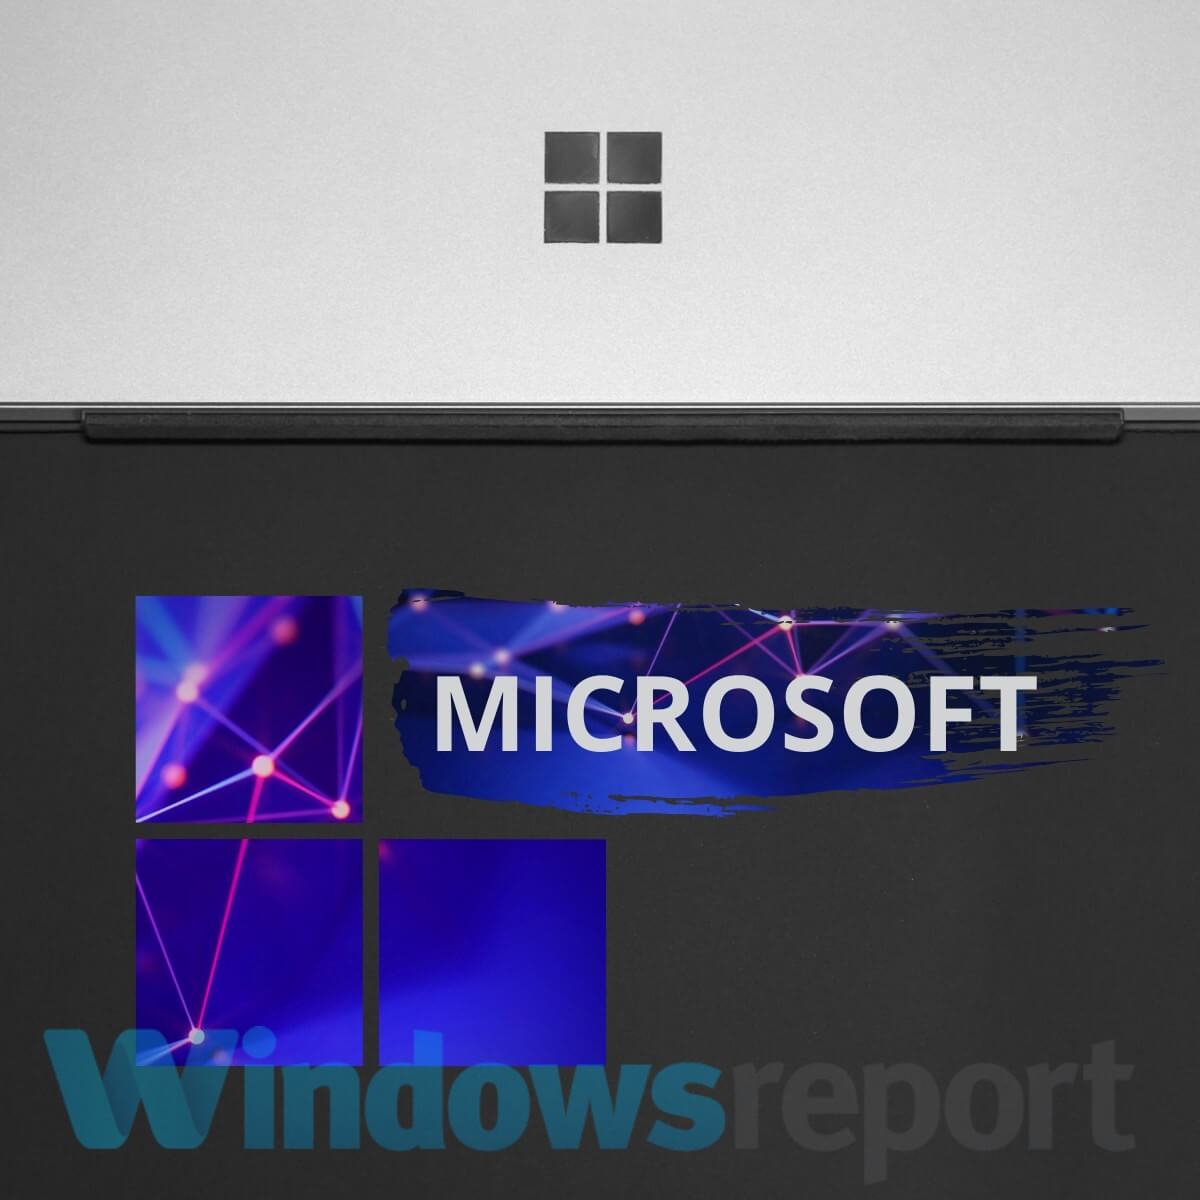 Hyper V could not be realized due to validation errors - laptop with Microsoft logo